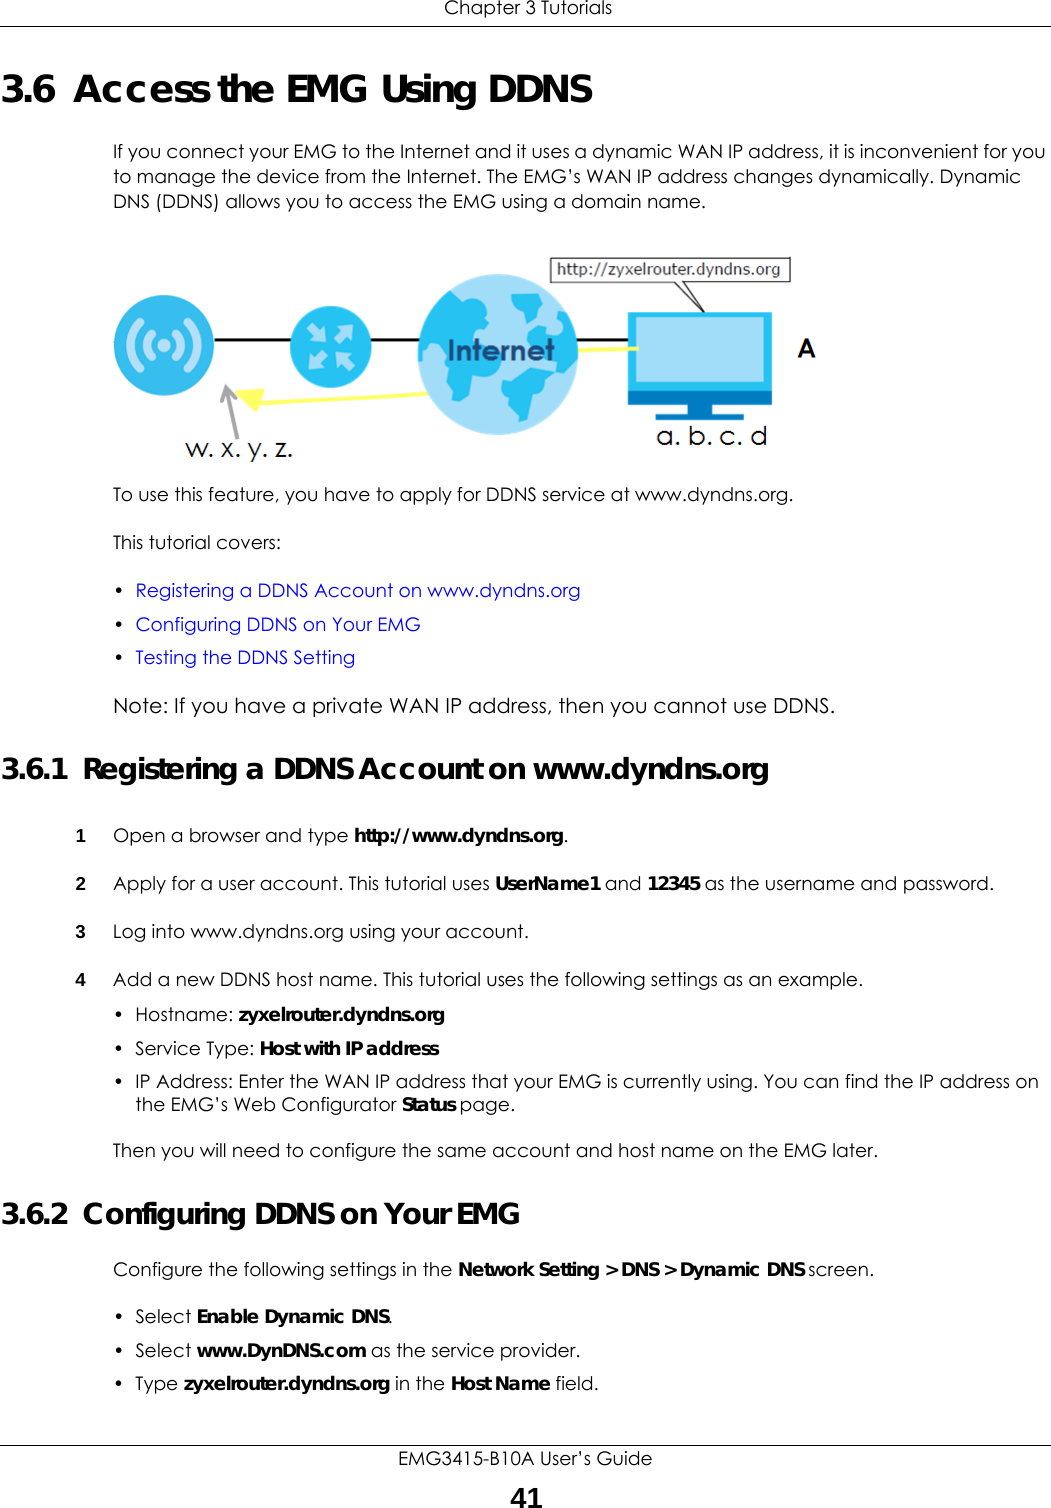  Chapter 3 TutorialsEMG3415-B10A User’s Guide413.6  Access the EMG Using DDNSIf you connect your EMG to the Internet and it uses a dynamic WAN IP address, it is inconvenient for you to manage the device from the Internet. The EMG’s WAN IP address changes dynamically. Dynamic DNS (DDNS) allows you to access the EMG using a domain name. To use this feature, you have to apply for DDNS service at www.dyndns.org.This tutorial covers:•Registering a DDNS Account on www.dyndns.org•Configuring DDNS on Your EMG•Testing the DDNS SettingNote: If you have a private WAN IP address, then you cannot use DDNS.3.6.1  Registering a DDNS Account on www.dyndns.org1Open a browser and type http://www.dyndns.org.2Apply for a user account. This tutorial uses UserName1 and 12345 as the username and password.3Log into www.dyndns.org using your account.4Add a new DDNS host name. This tutorial uses the following settings as an example.• Hostname: zyxelrouter.dyndns.org• Service Type: Host with IP address• IP Address: Enter the WAN IP address that your EMG is currently using. You can find the IP address on the EMG’s Web Configurator Status page.Then you will need to configure the same account and host name on the EMG later.3.6.2  Configuring DDNS on Your EMGConfigure the following settings in the Network Setting &gt; DNS &gt; Dynamic DNS screen.•Select Enable Dynamic DNS.•Select www.DynDNS.com as the service provider.•Type zyxelrouter.dyndns.org in the Host Name field.